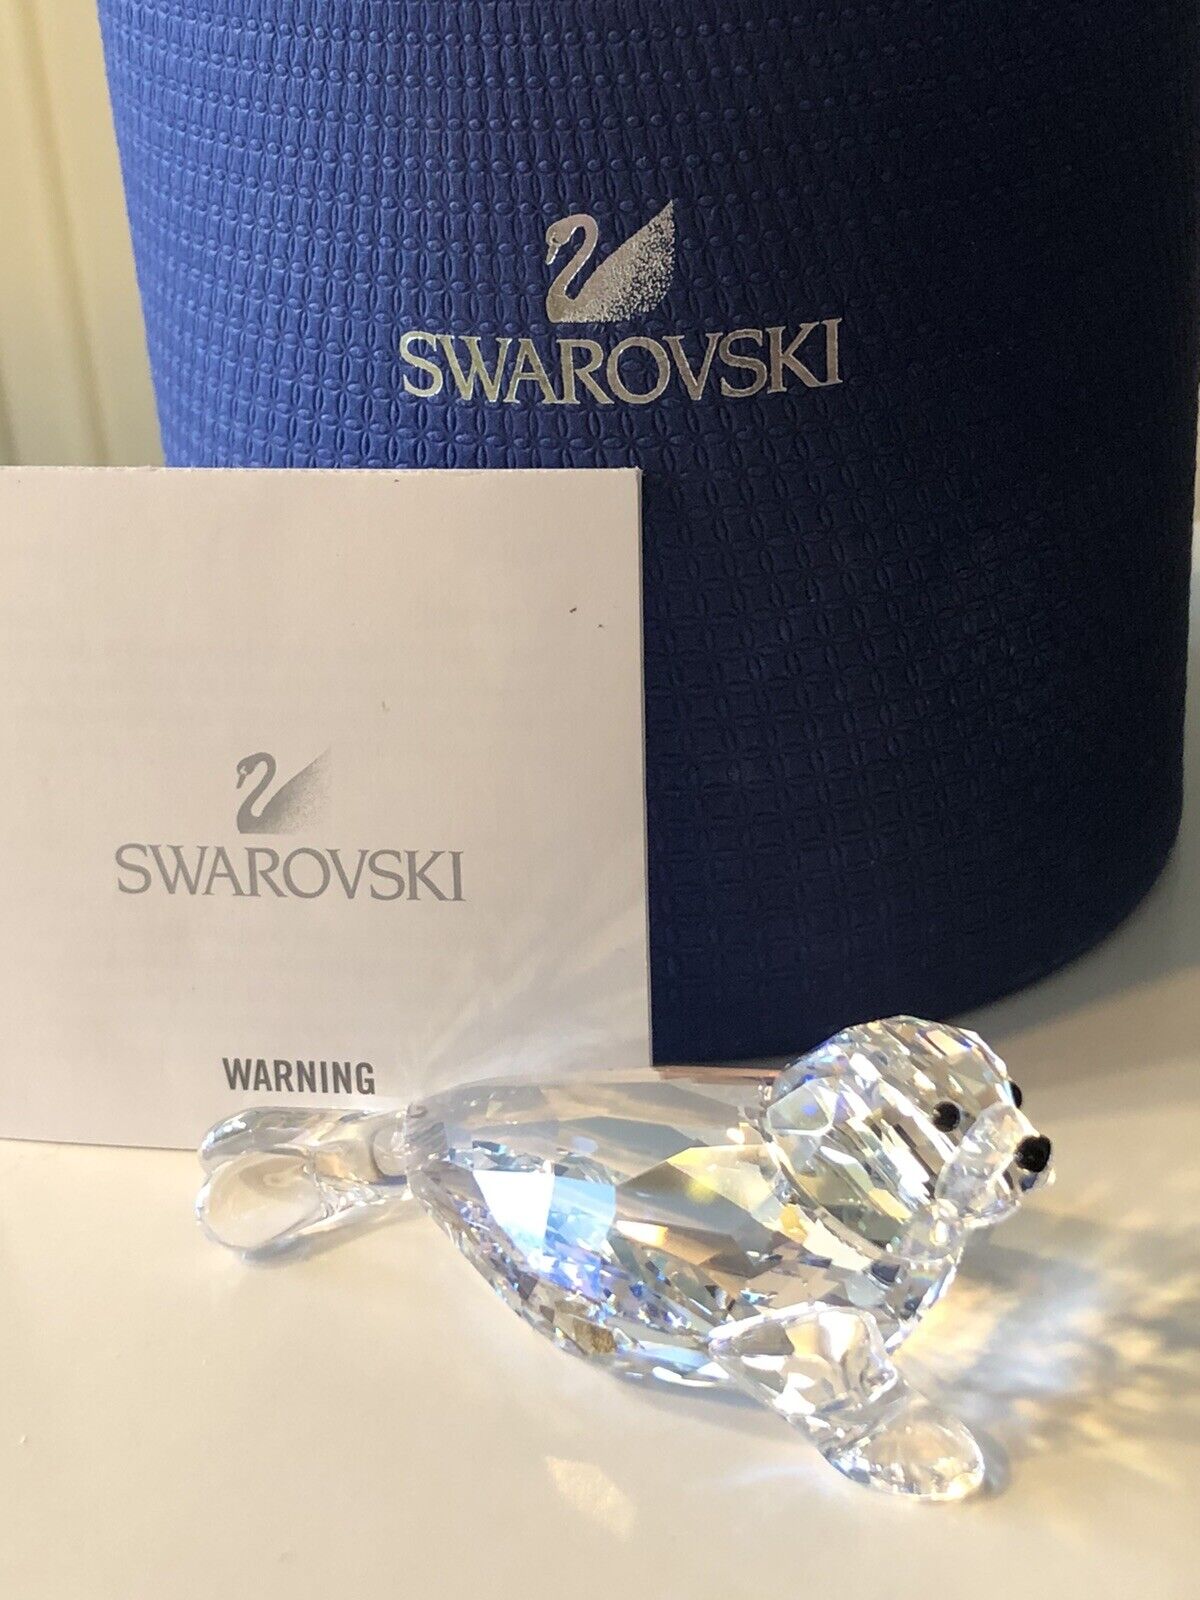 Swarovski Crystal 9100 000 339 Baby Seal SCS 2012 1096748 In Box With Cert